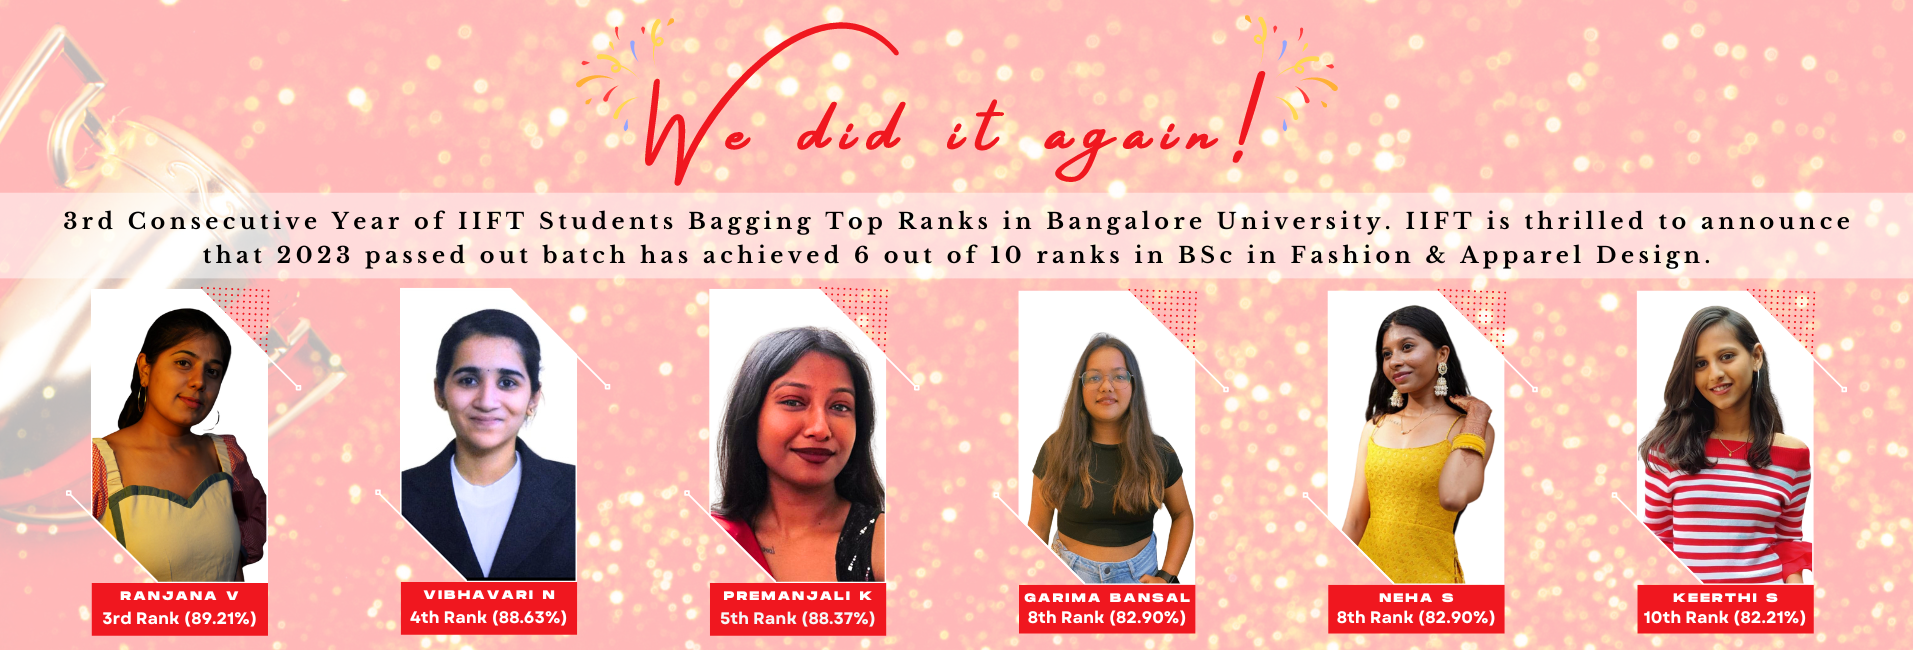 Pictures of all the BSc FAD Bangalore University Rank Holders along with their percentages & Ranks